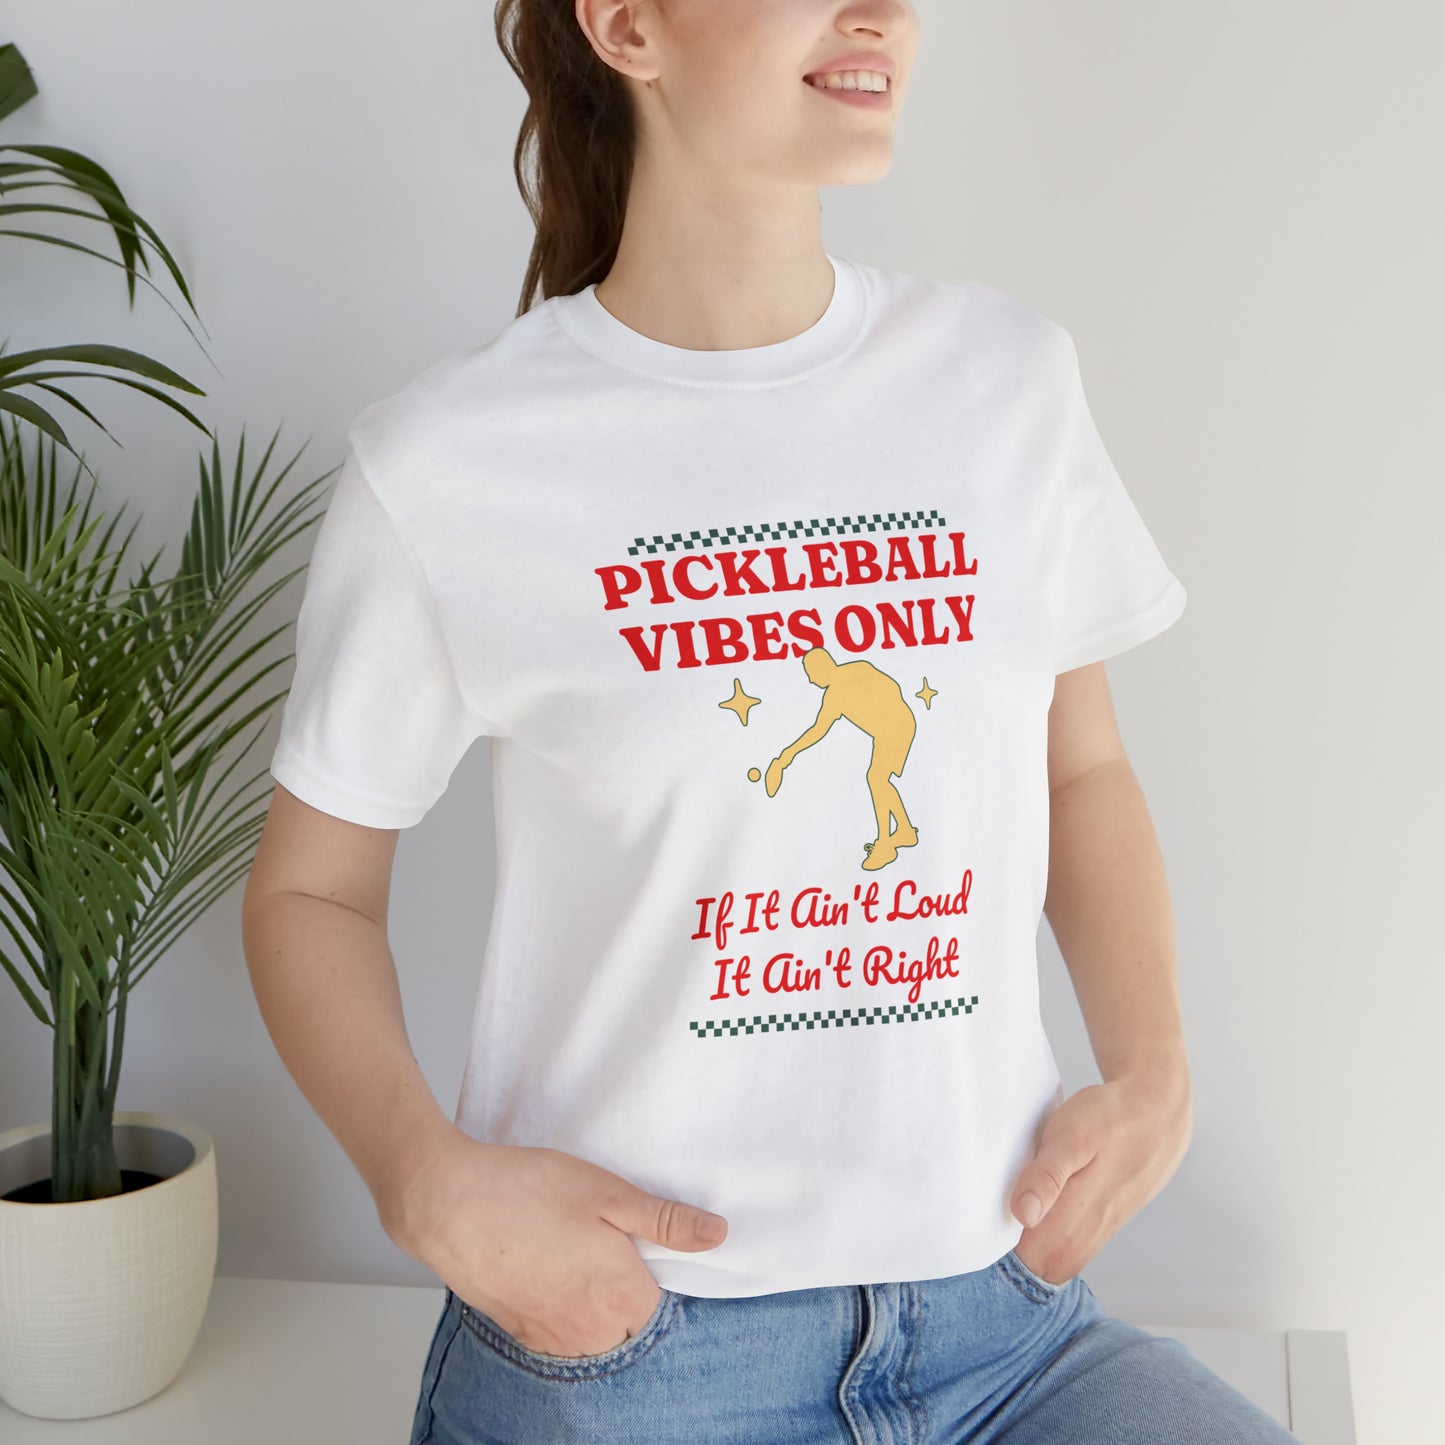 Pickleball Vibes Only T-Shirt Embrace the Noise